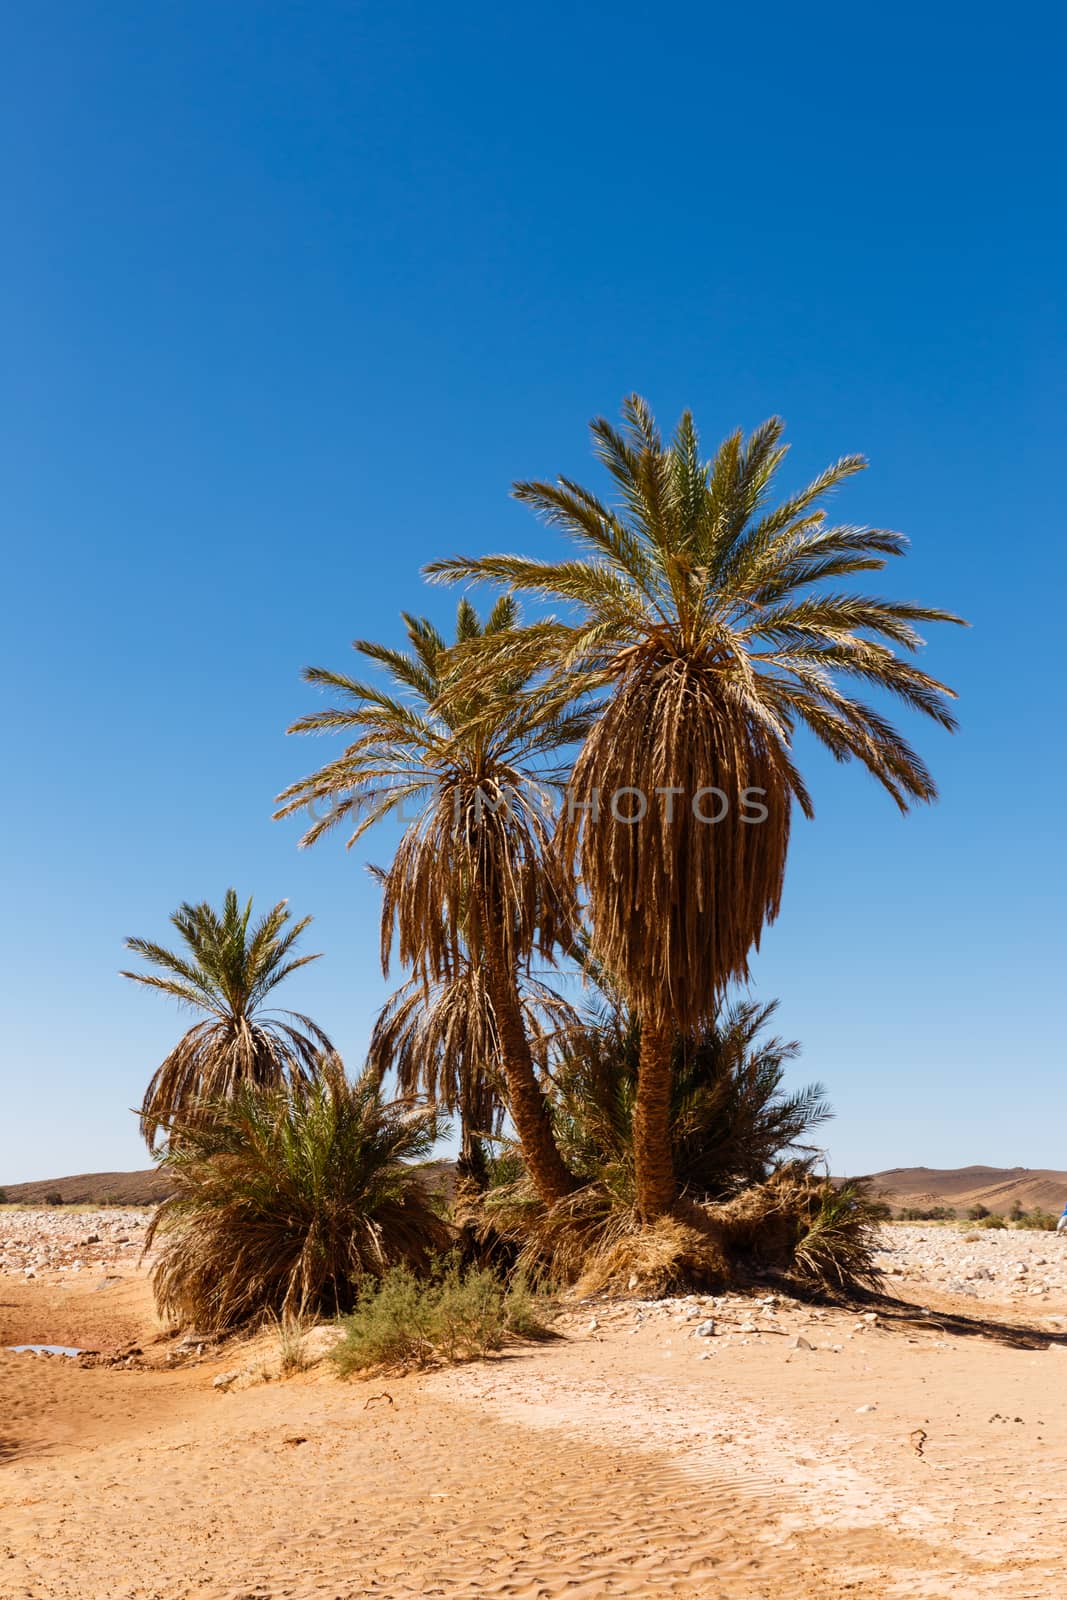 palm in the  desert  by Mieszko9